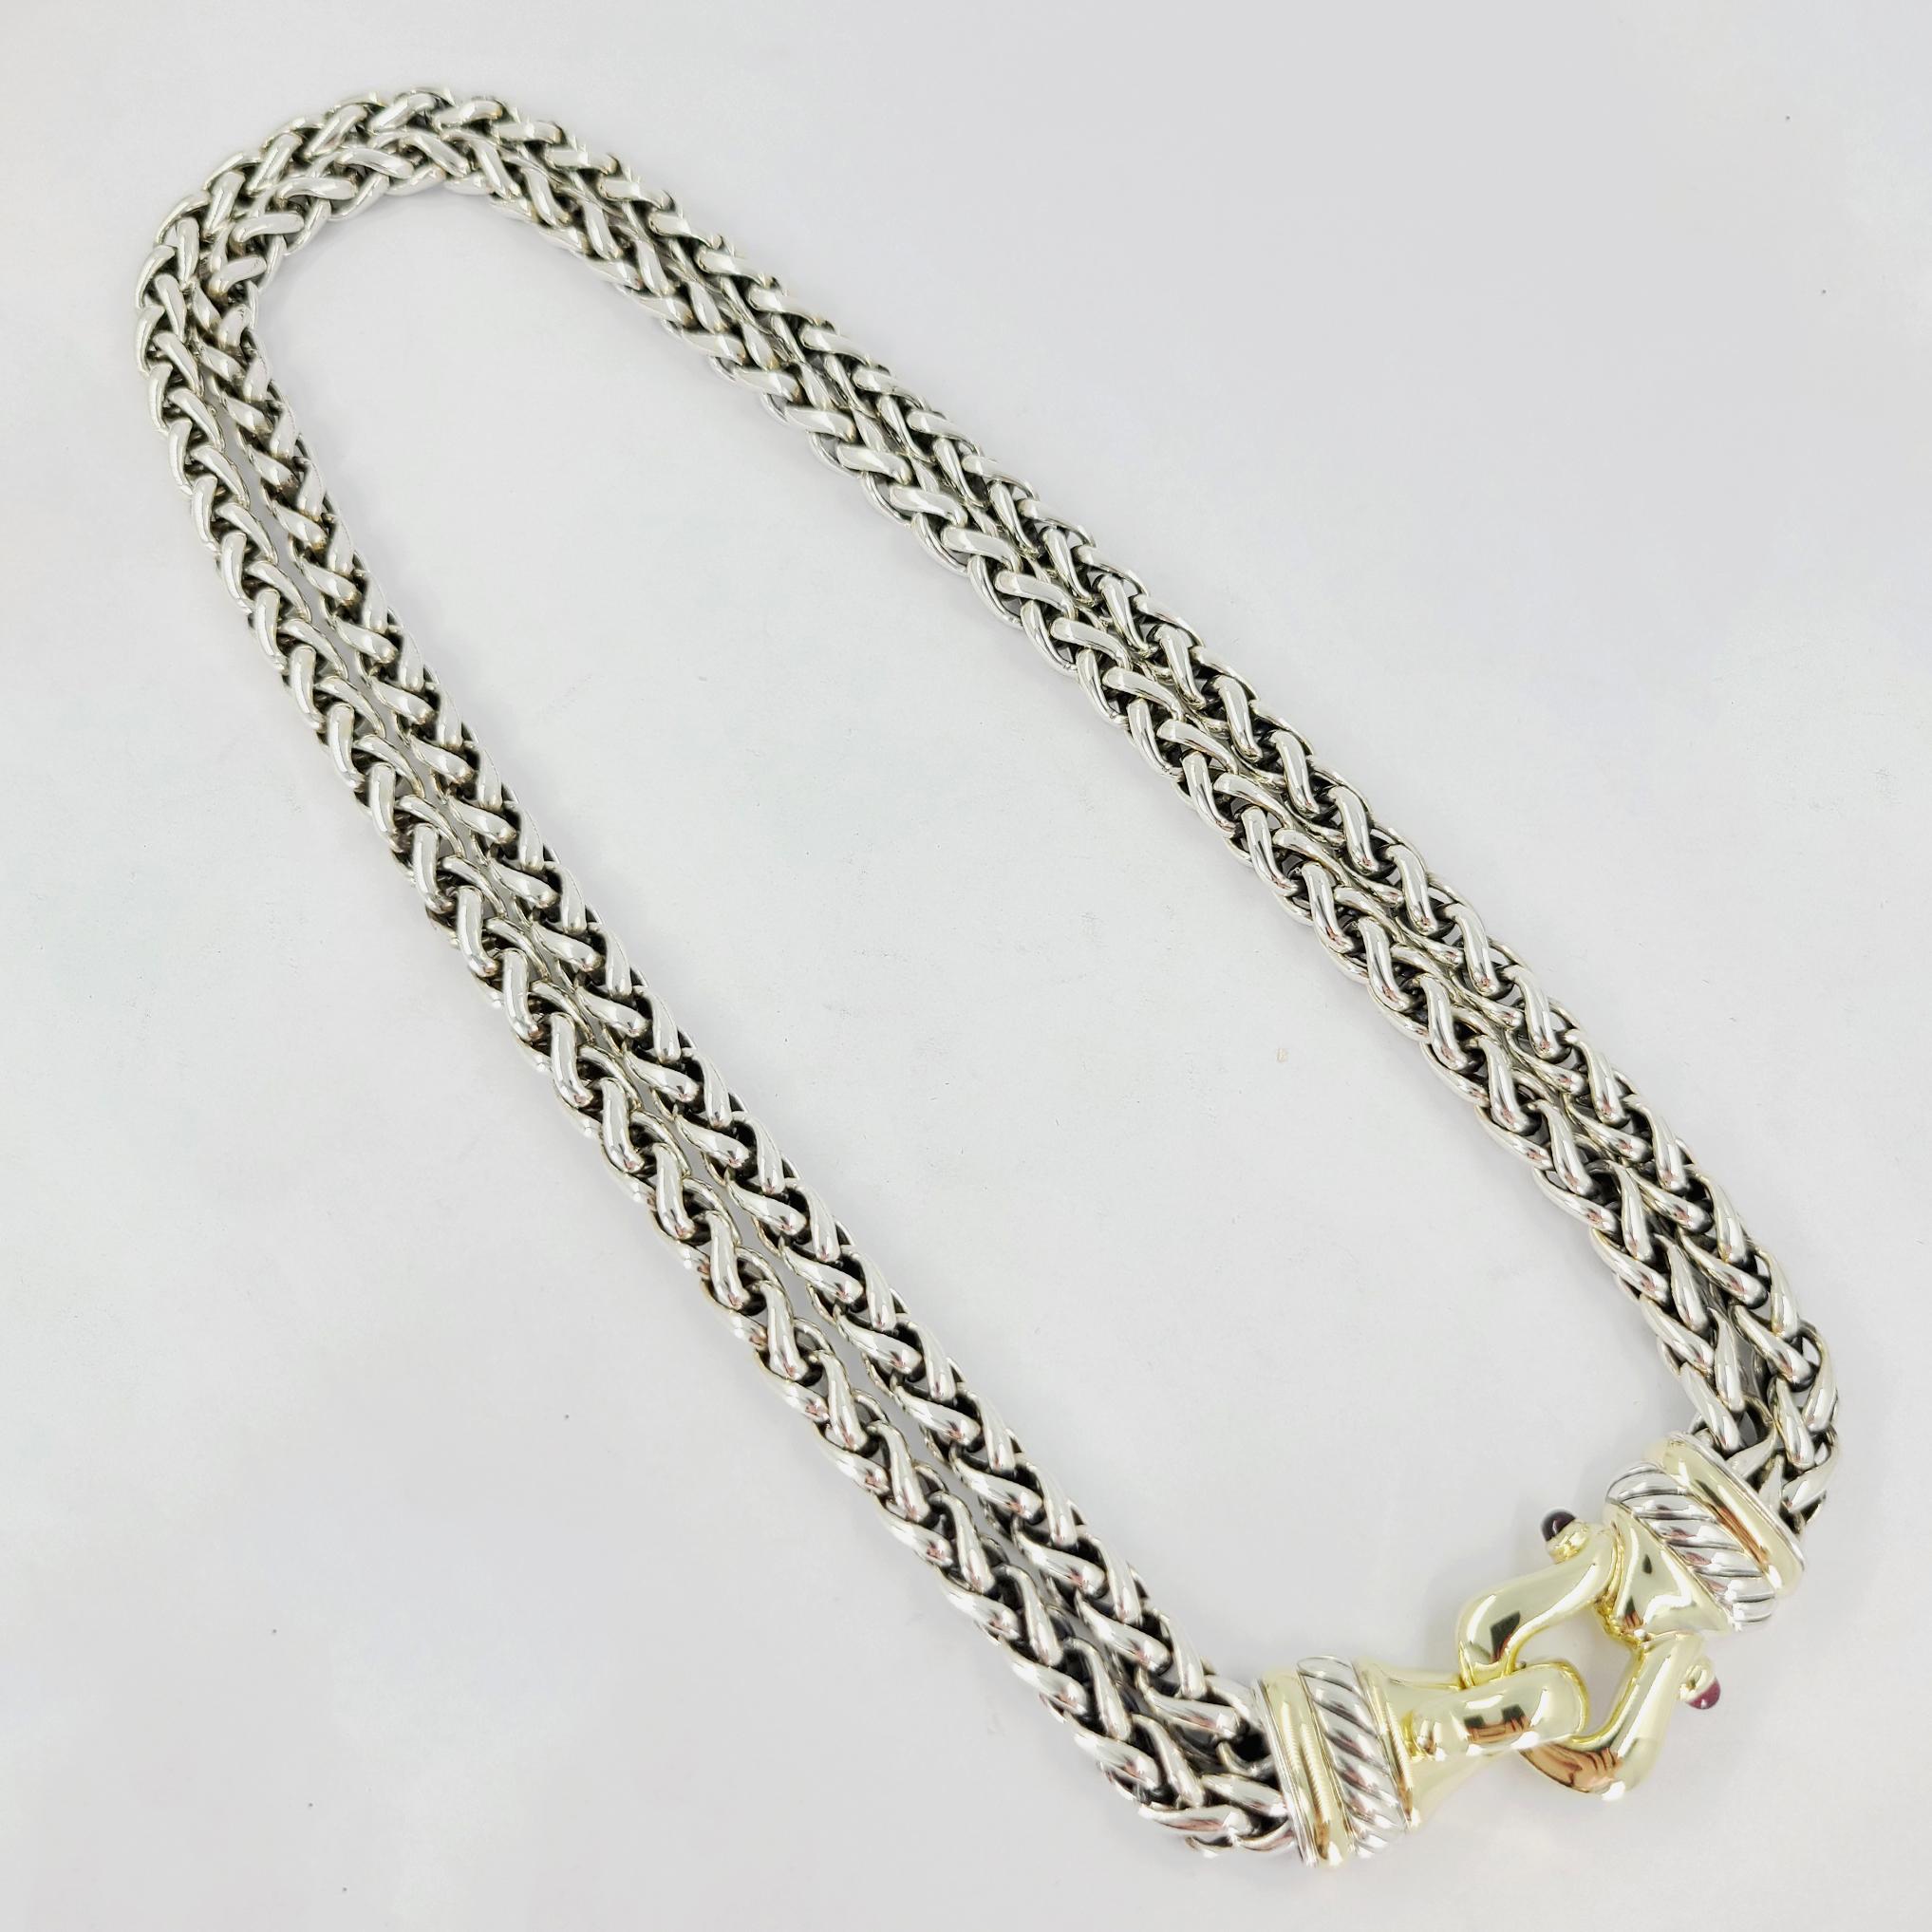 Pre-Owned David Yurman Sterling Silver & 14 Karat Yellow Gold Double Strand Wheat Chain Buckle Necklace Featuring Bezel Set Garnet Cabochon Ends. 17 Inches Long.  Original MSRP $2,350